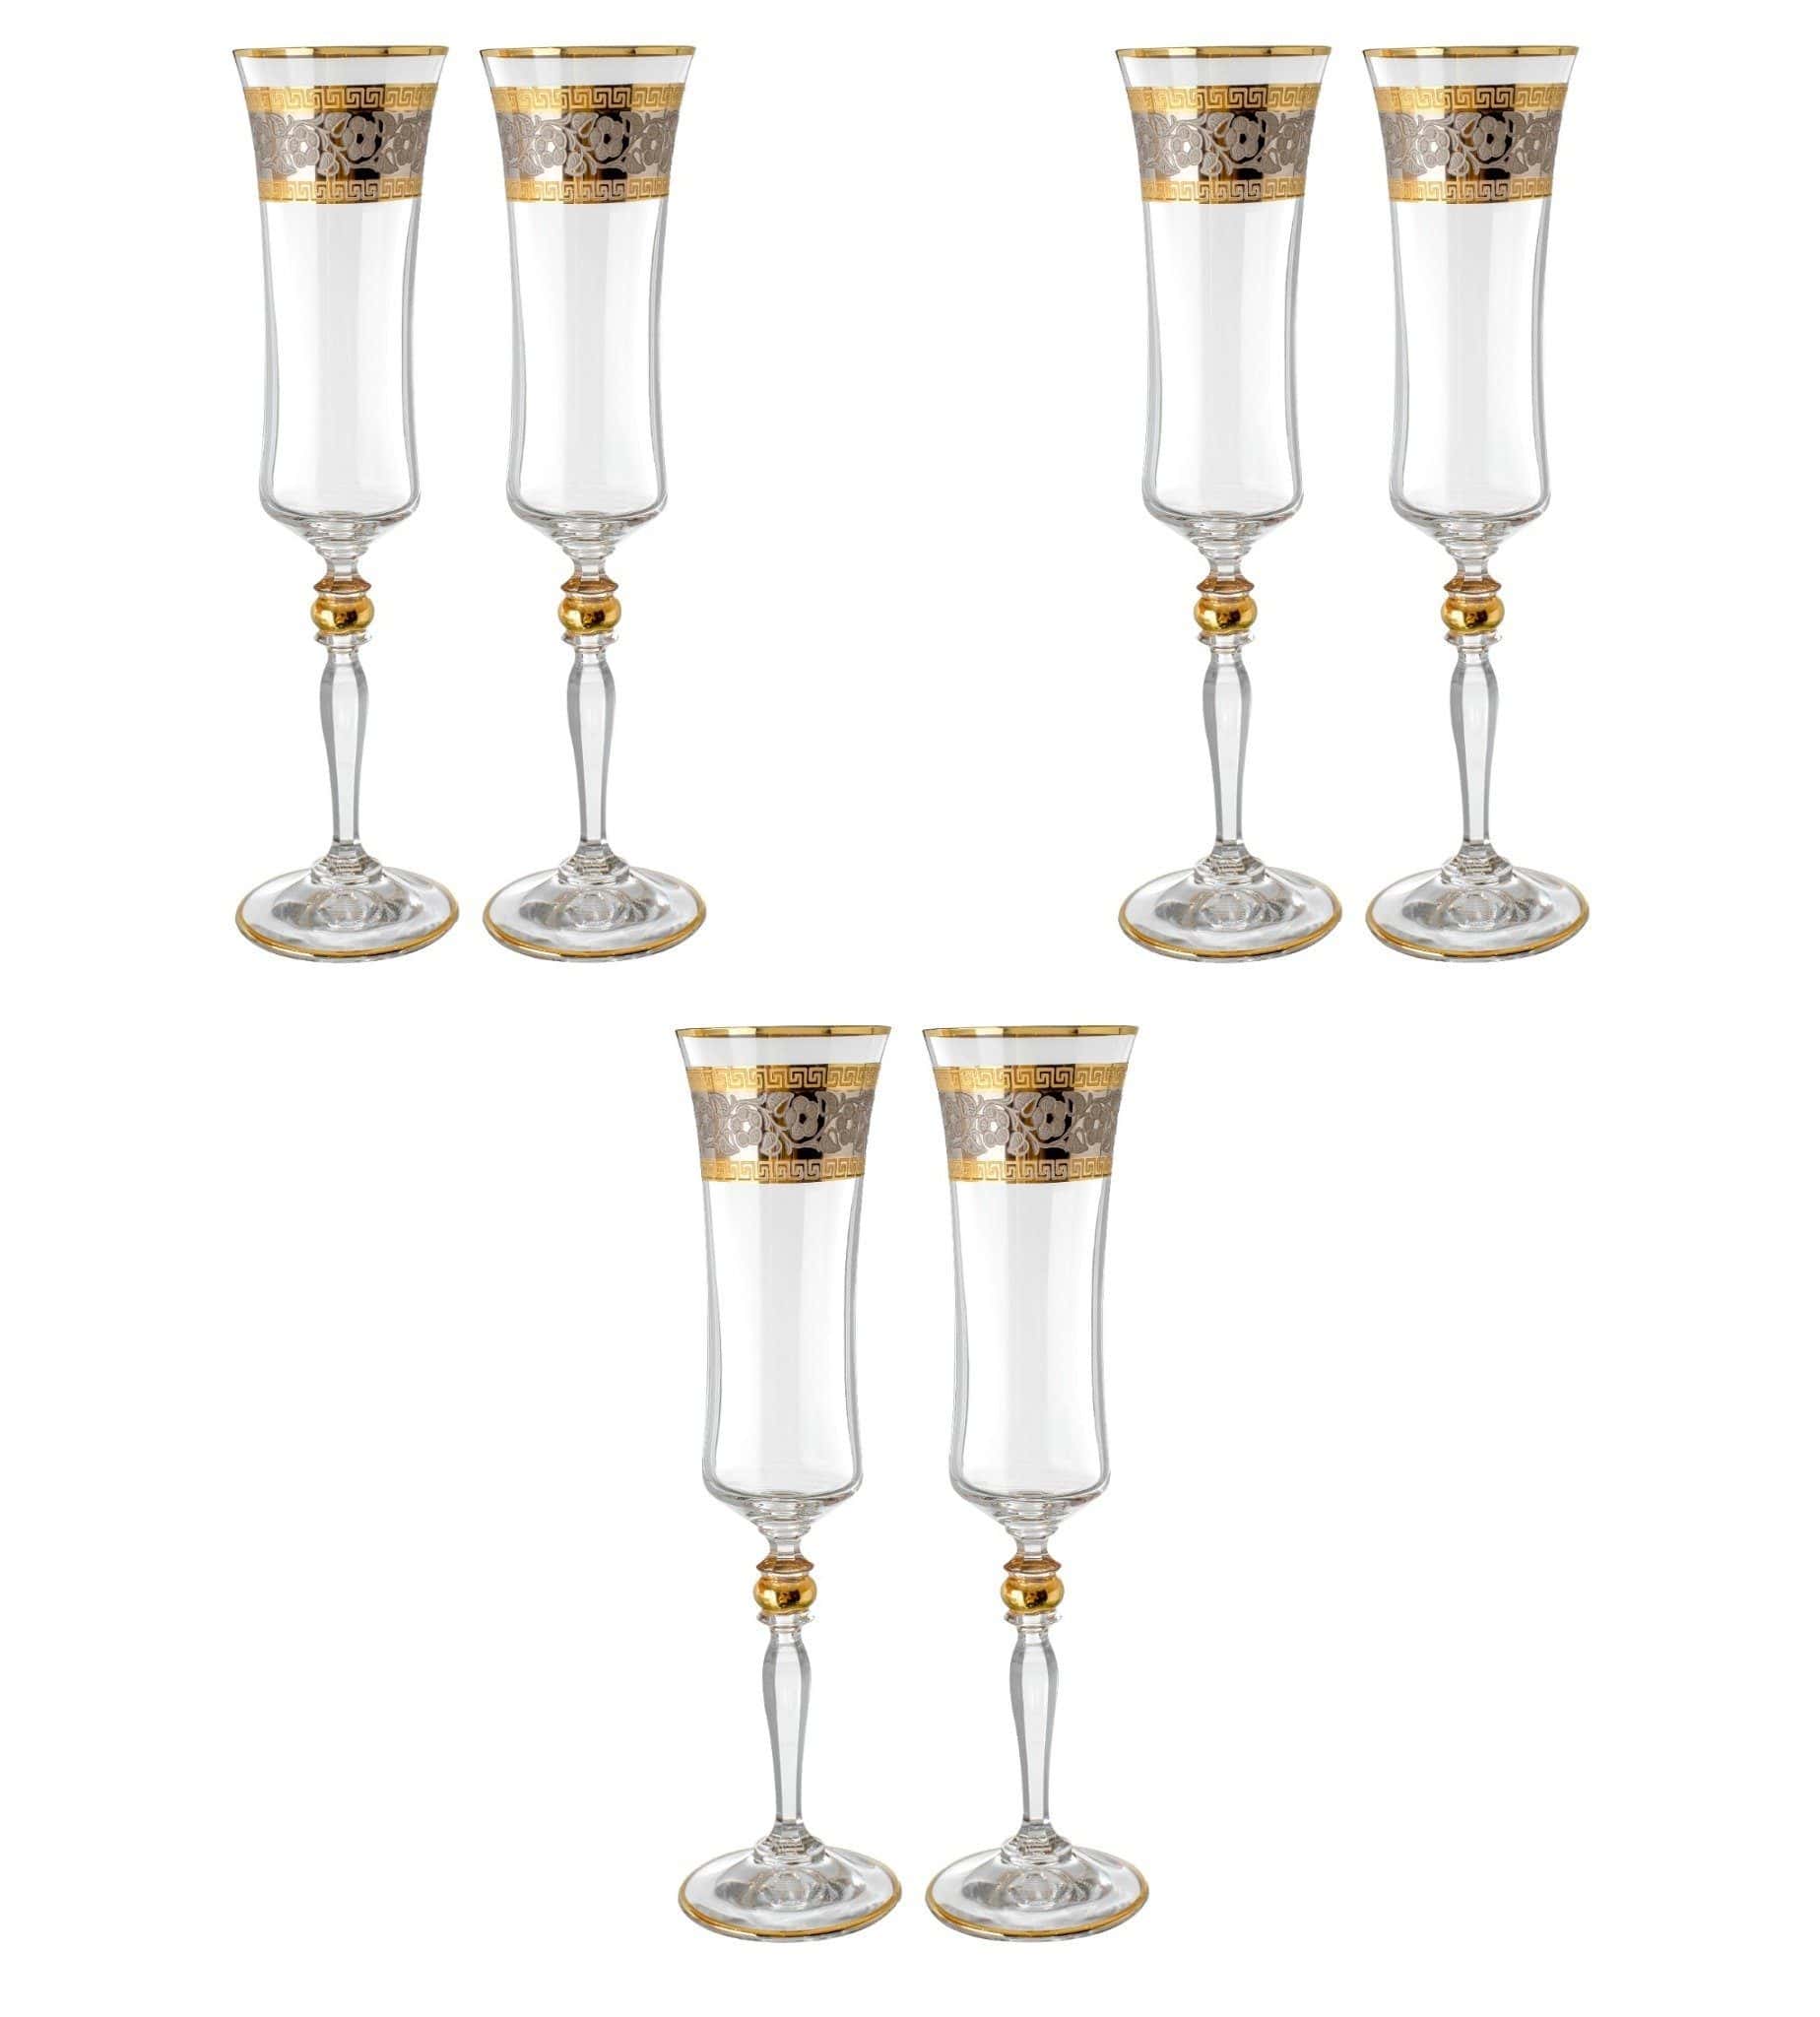 Bohemia Crystal - Flute Glass Set 6 Pieces - Gold & Silver - 150ml - 2700010398